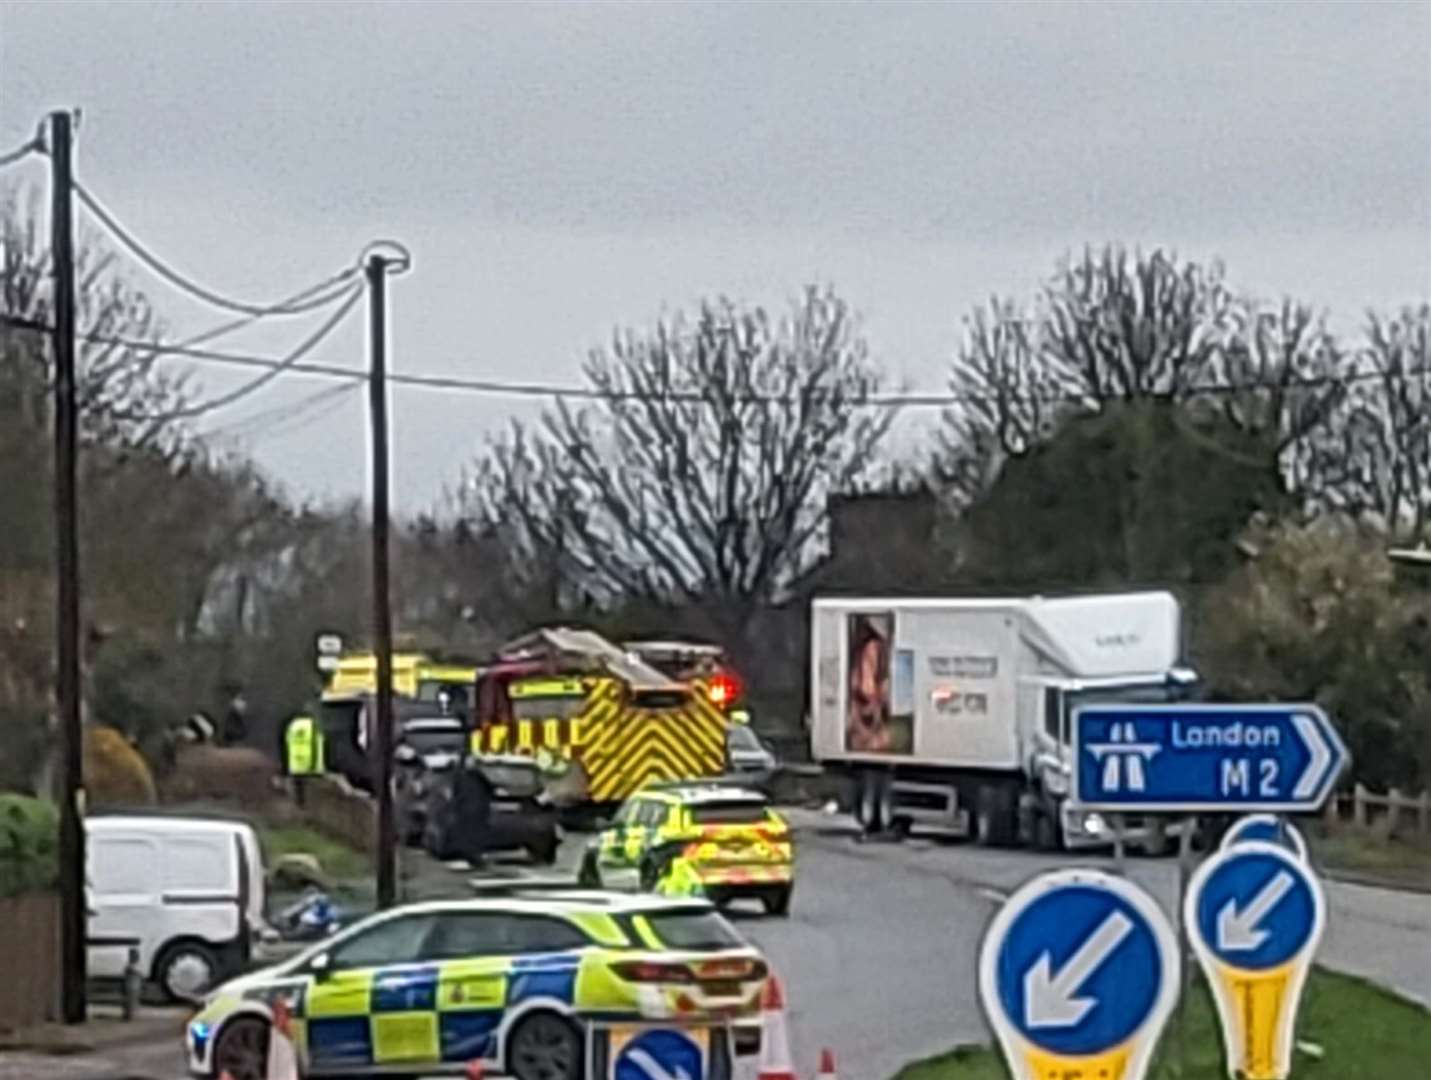 The A251 in Faversham was blocked after a fatal crash earlier this year